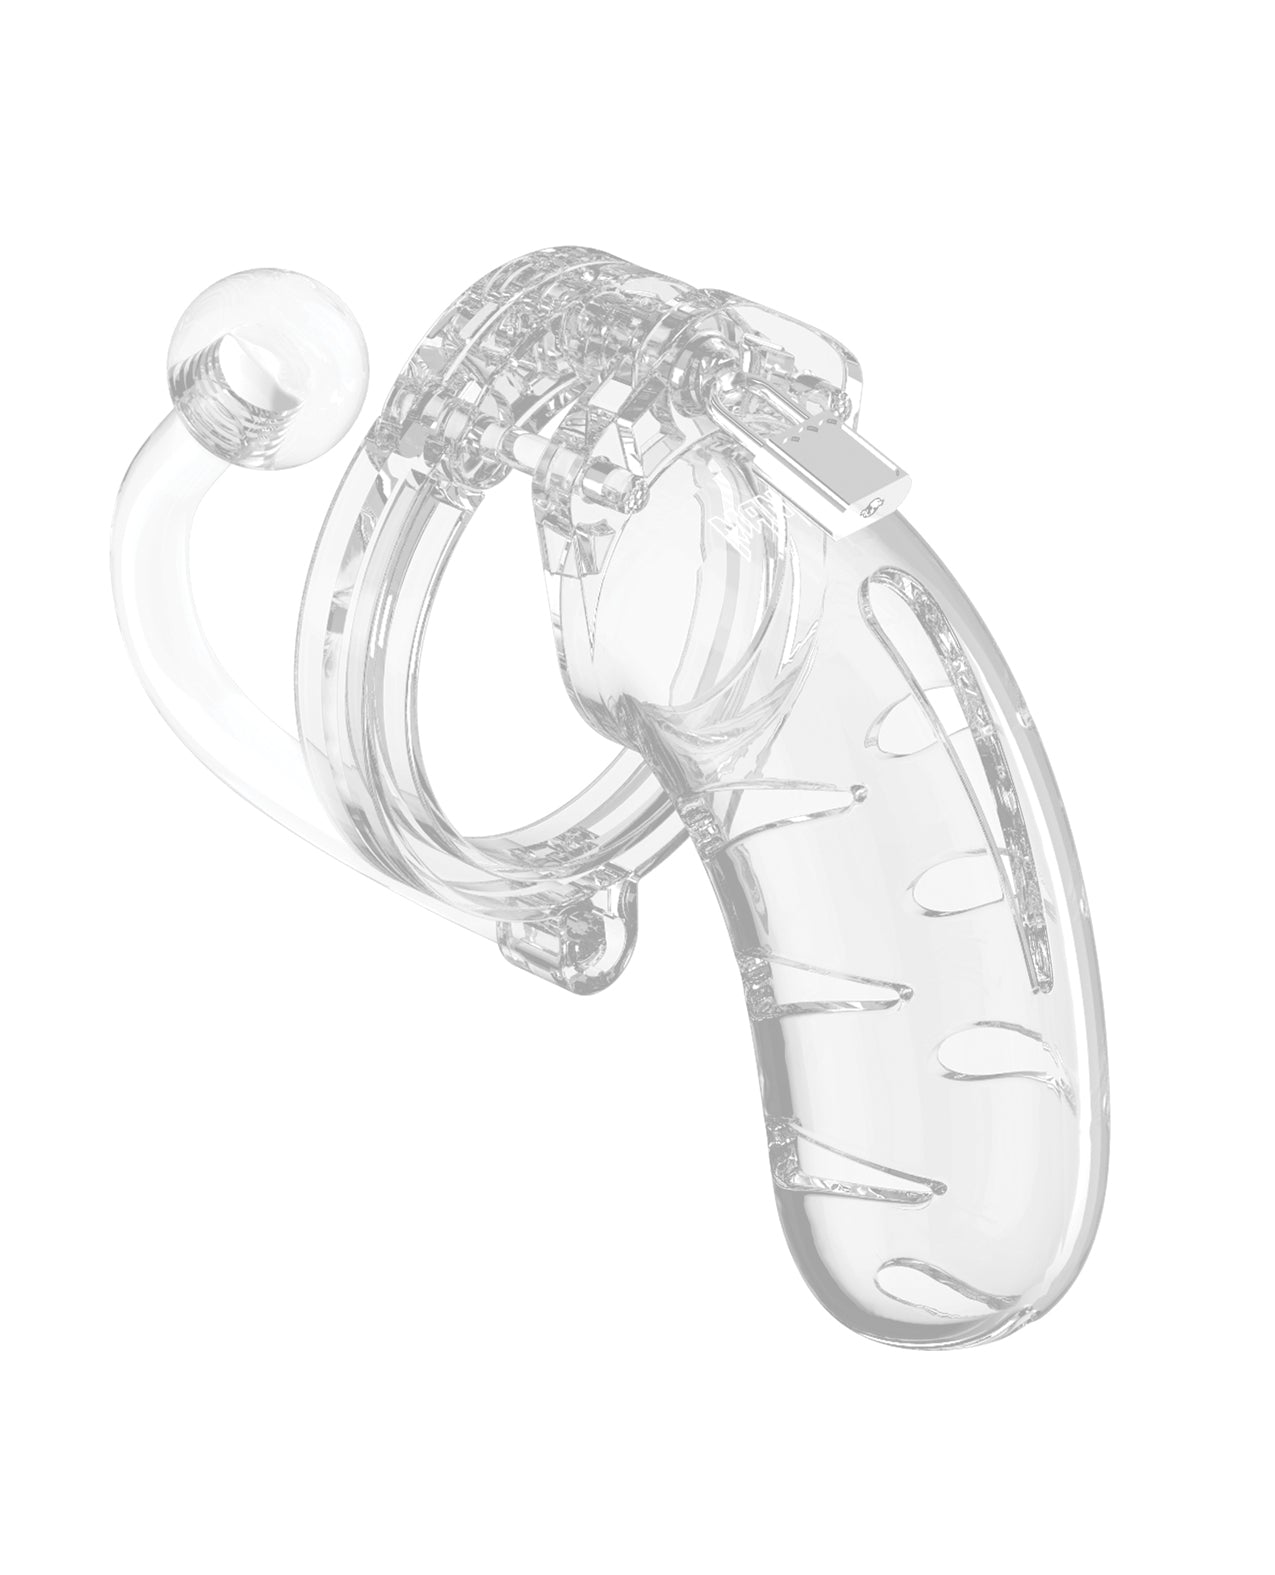 Shots Man Cage 4.5&quot; Cock Cage w/Plug 11 - Clear